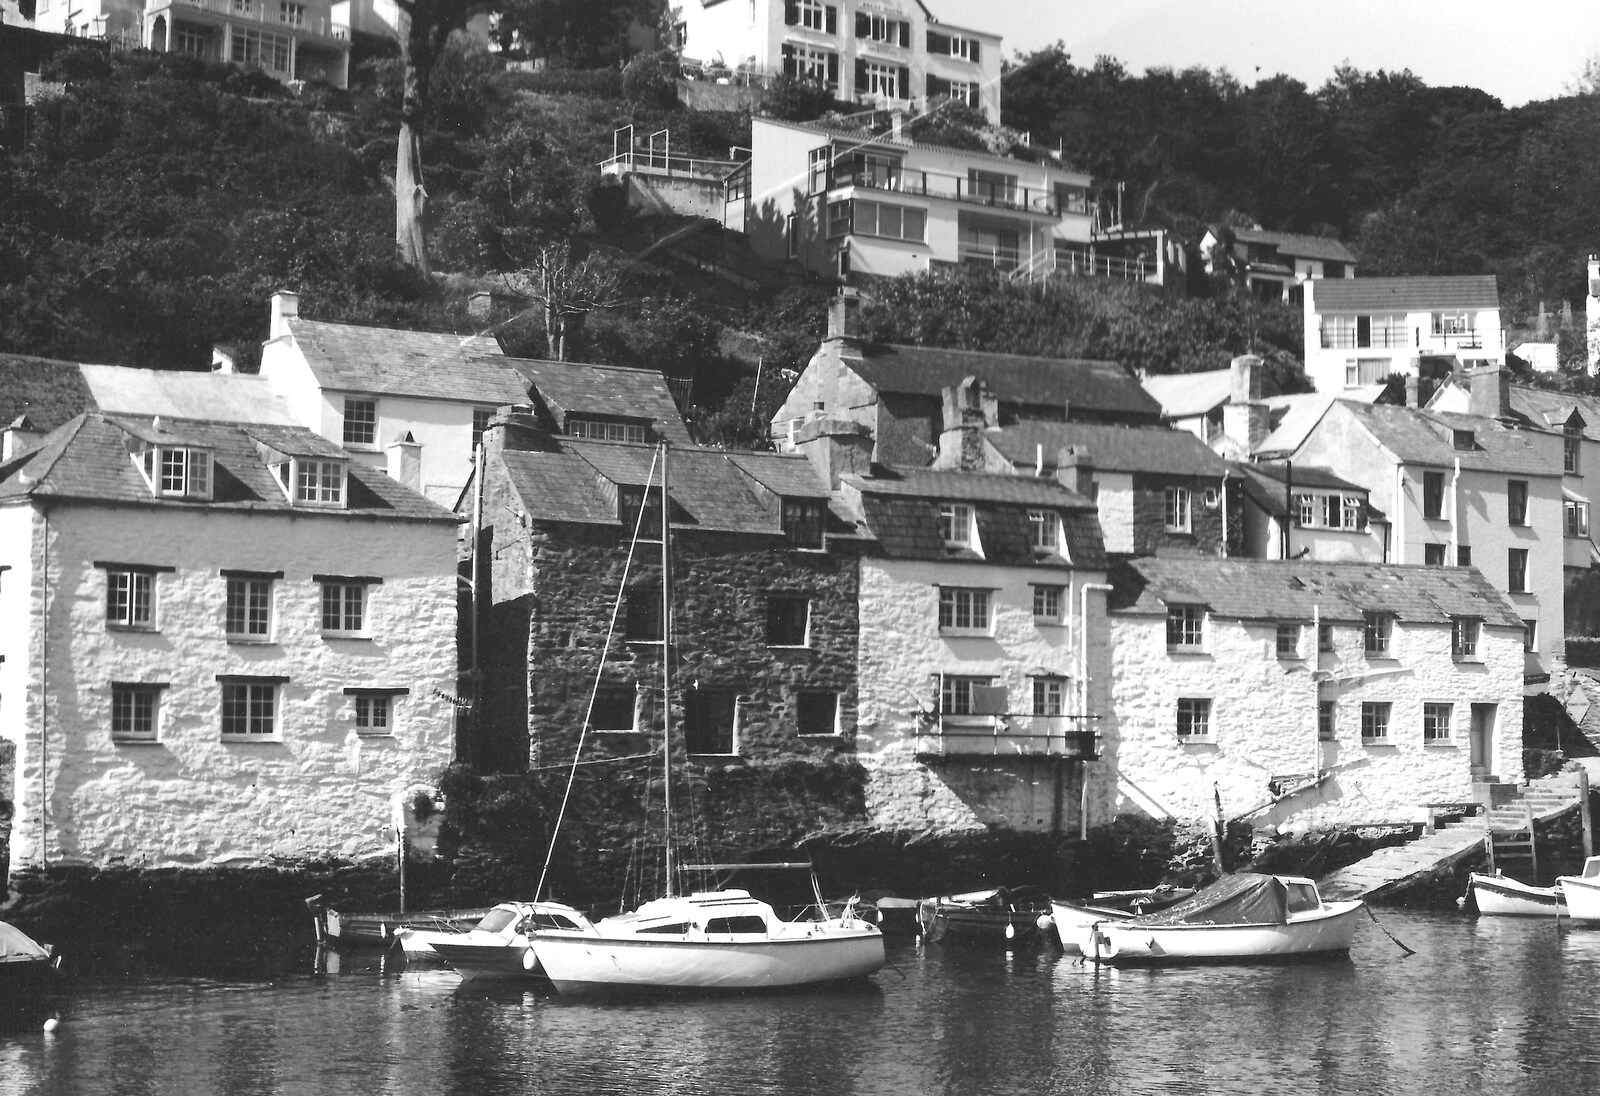 The houses of Polperro from Uni: The Last Day of Term, Plymouth Polytechnic, Devon - 2nd June 1987